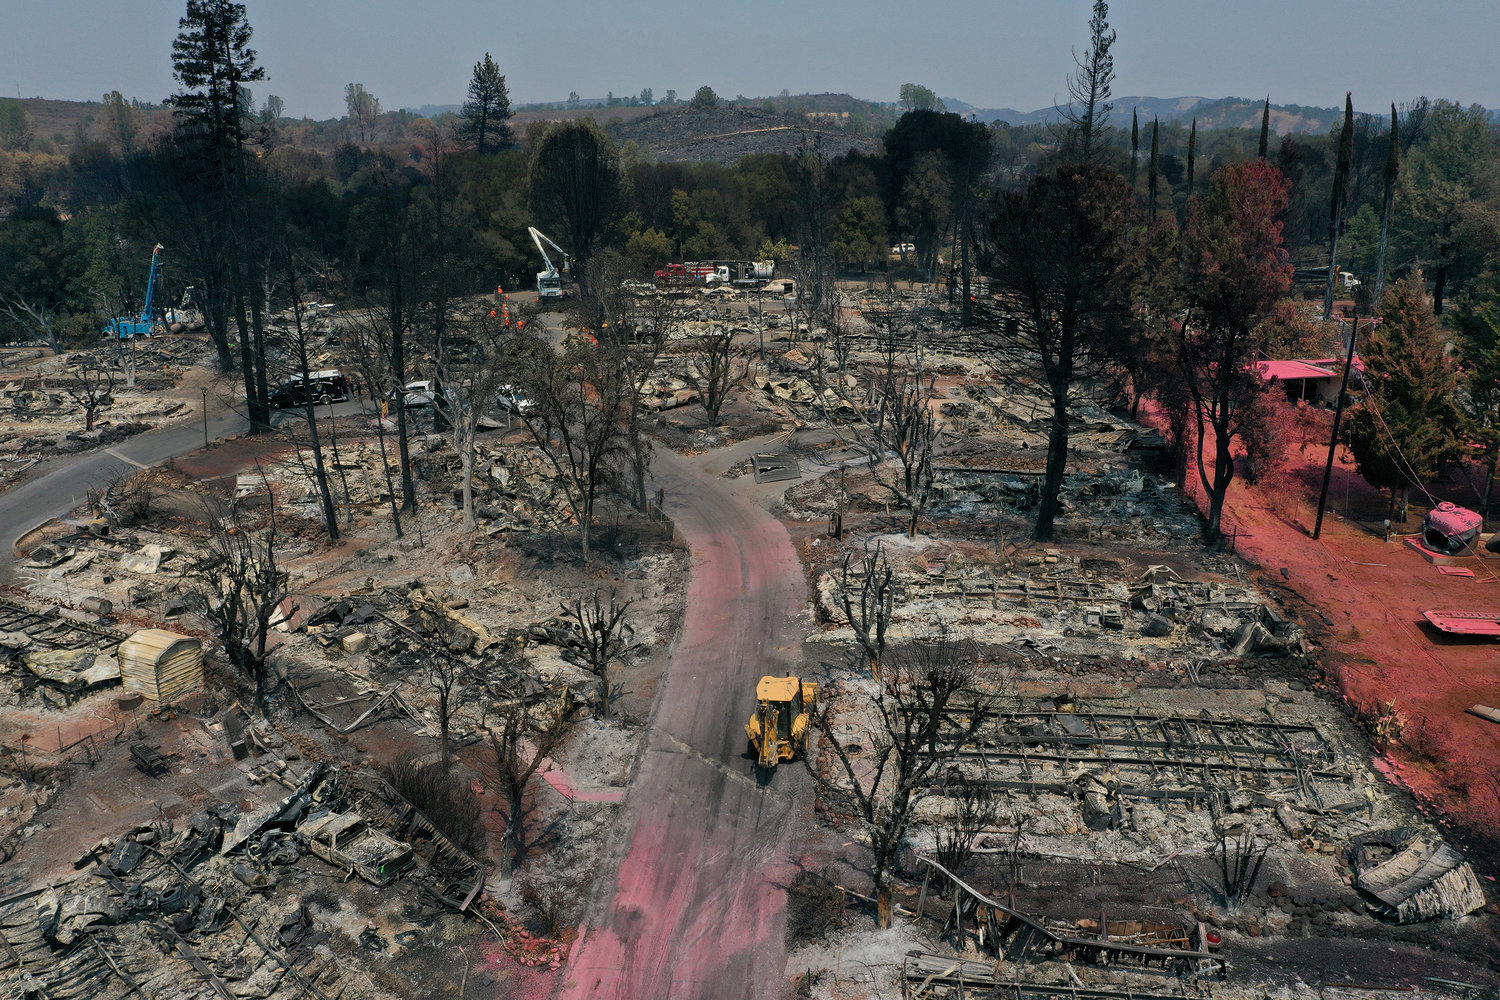 In an aerial view, burned mobile homes are visible at the Creekside Mobile Home Park a day after being destroyed by the Cache fire on August 19, 2021, in Clearlake, California. (Justin Sullivan/Getty Images/TNS)